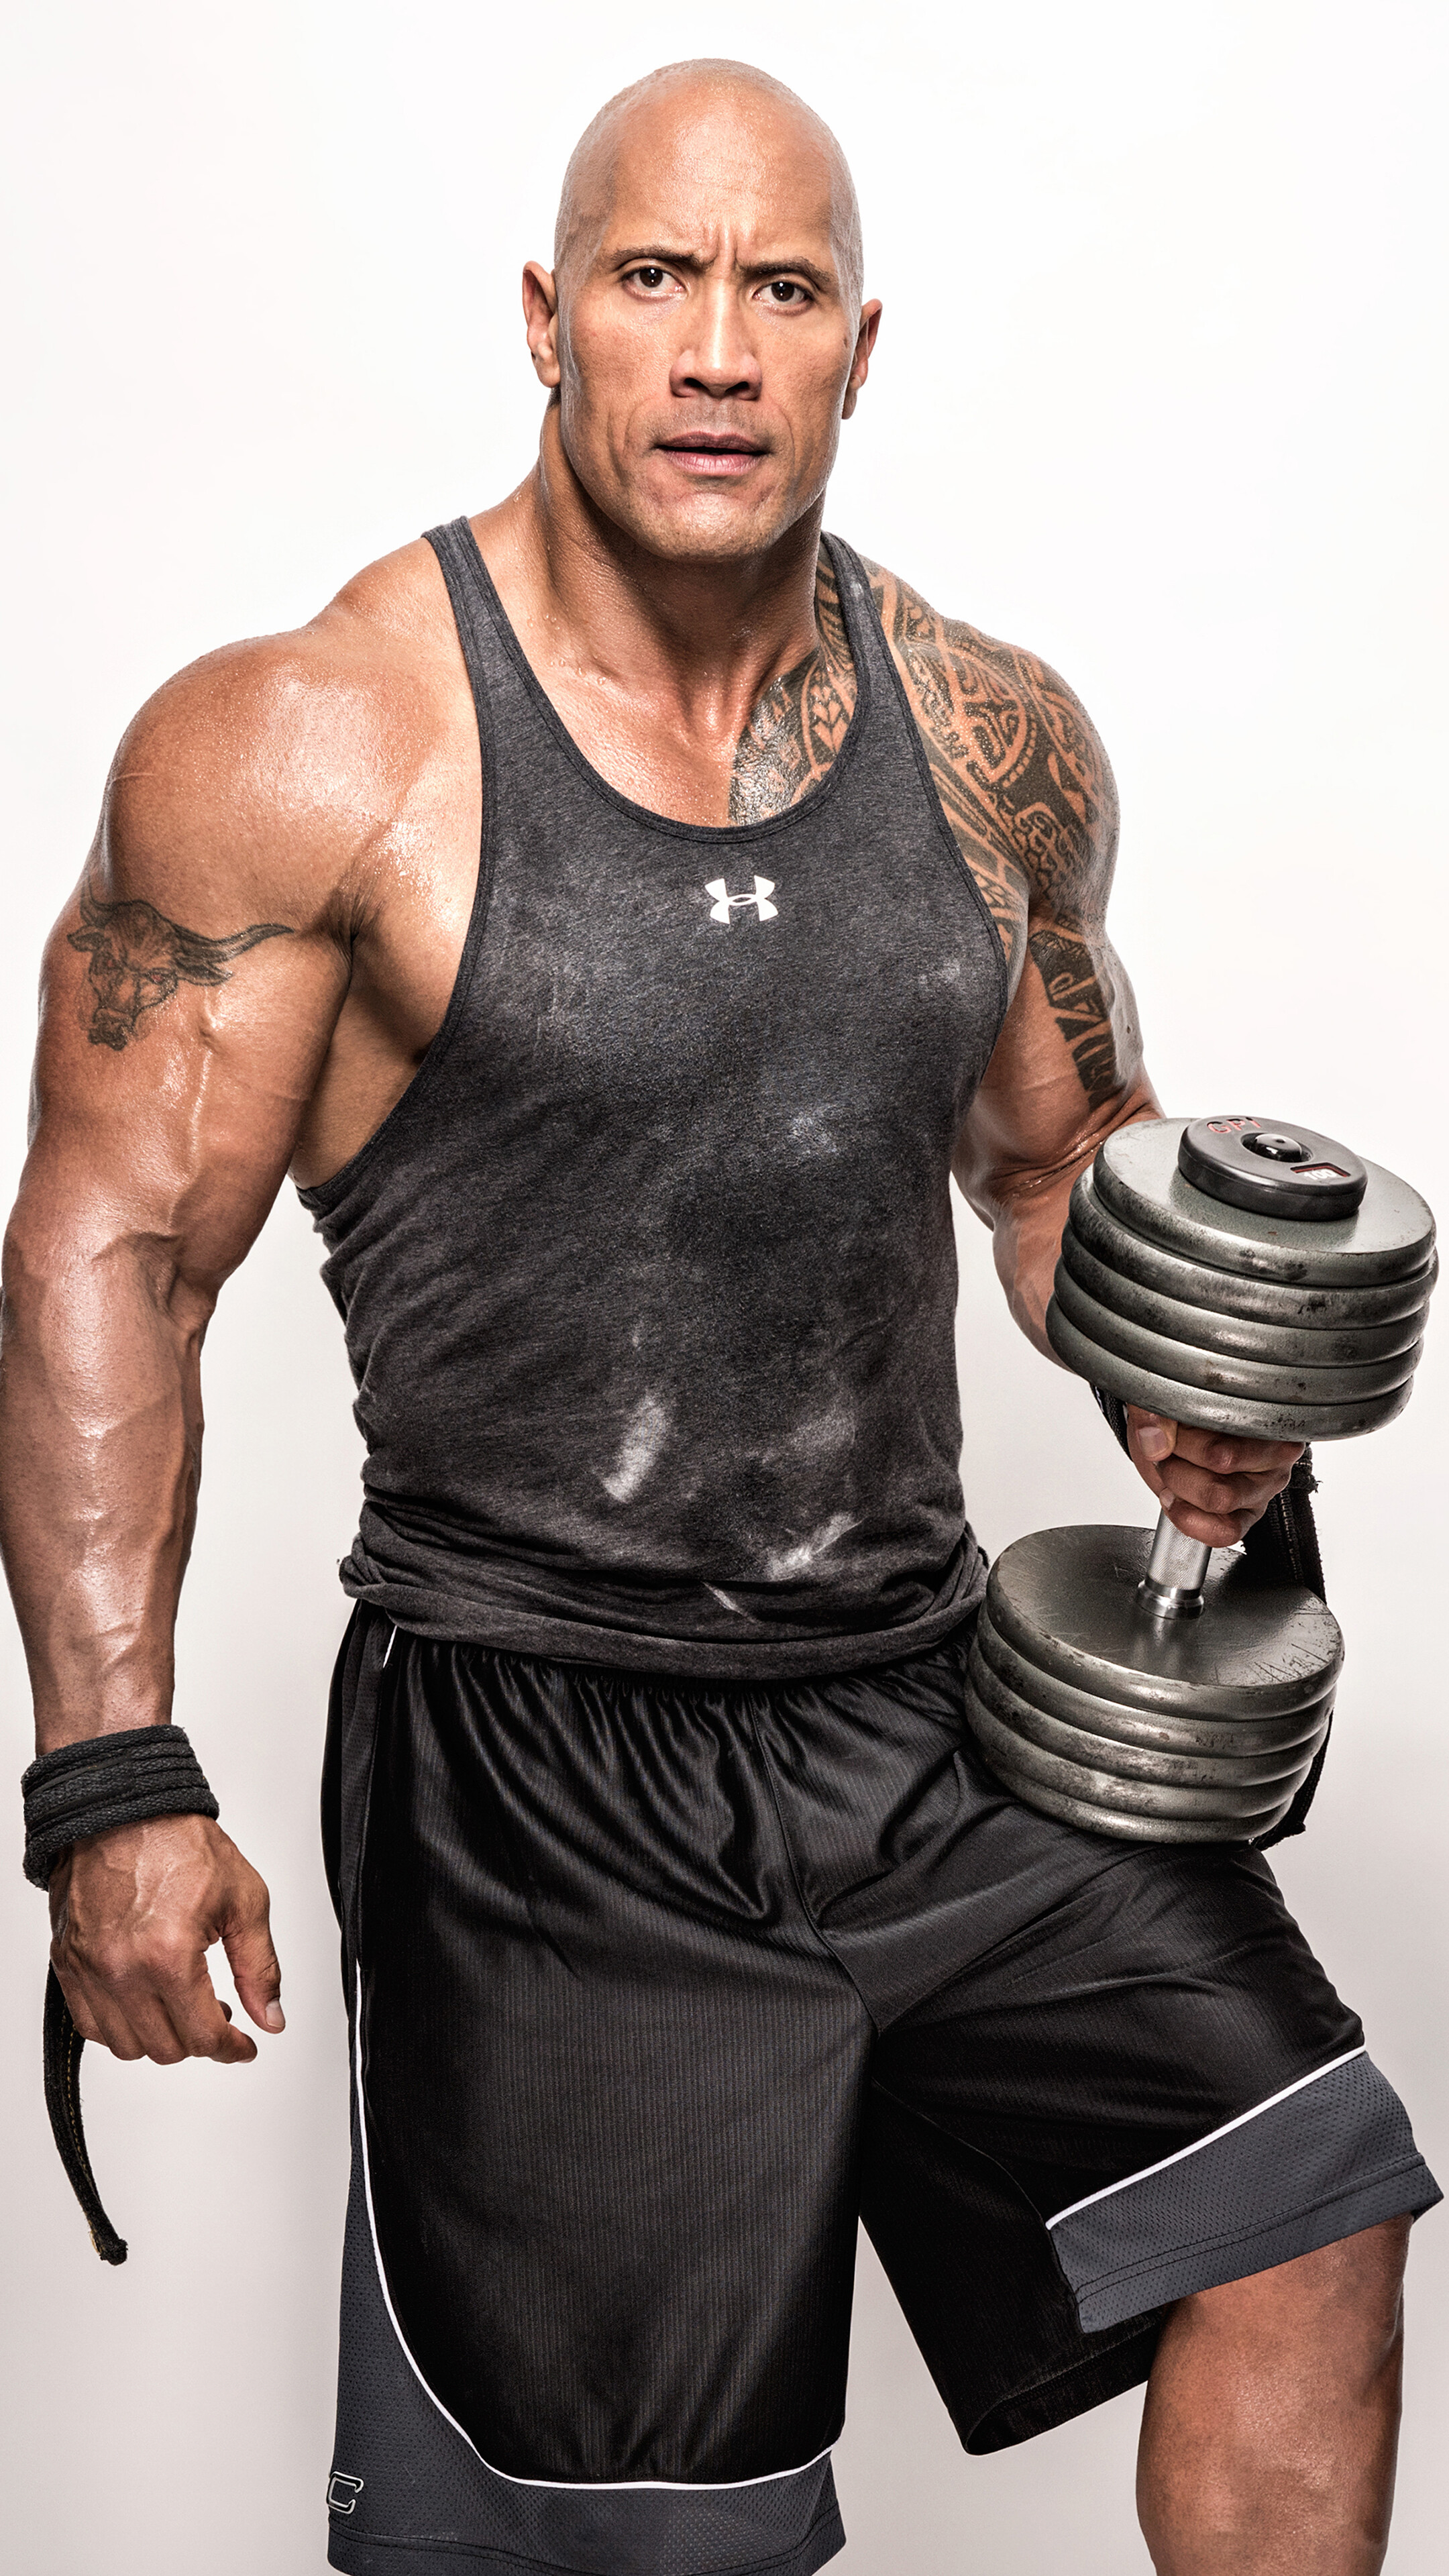 Dwayne, Johnson, Actor, Workout phone HD Wallpaper, Image, Background, Photo and Picture. Mocah HD Wallpaper